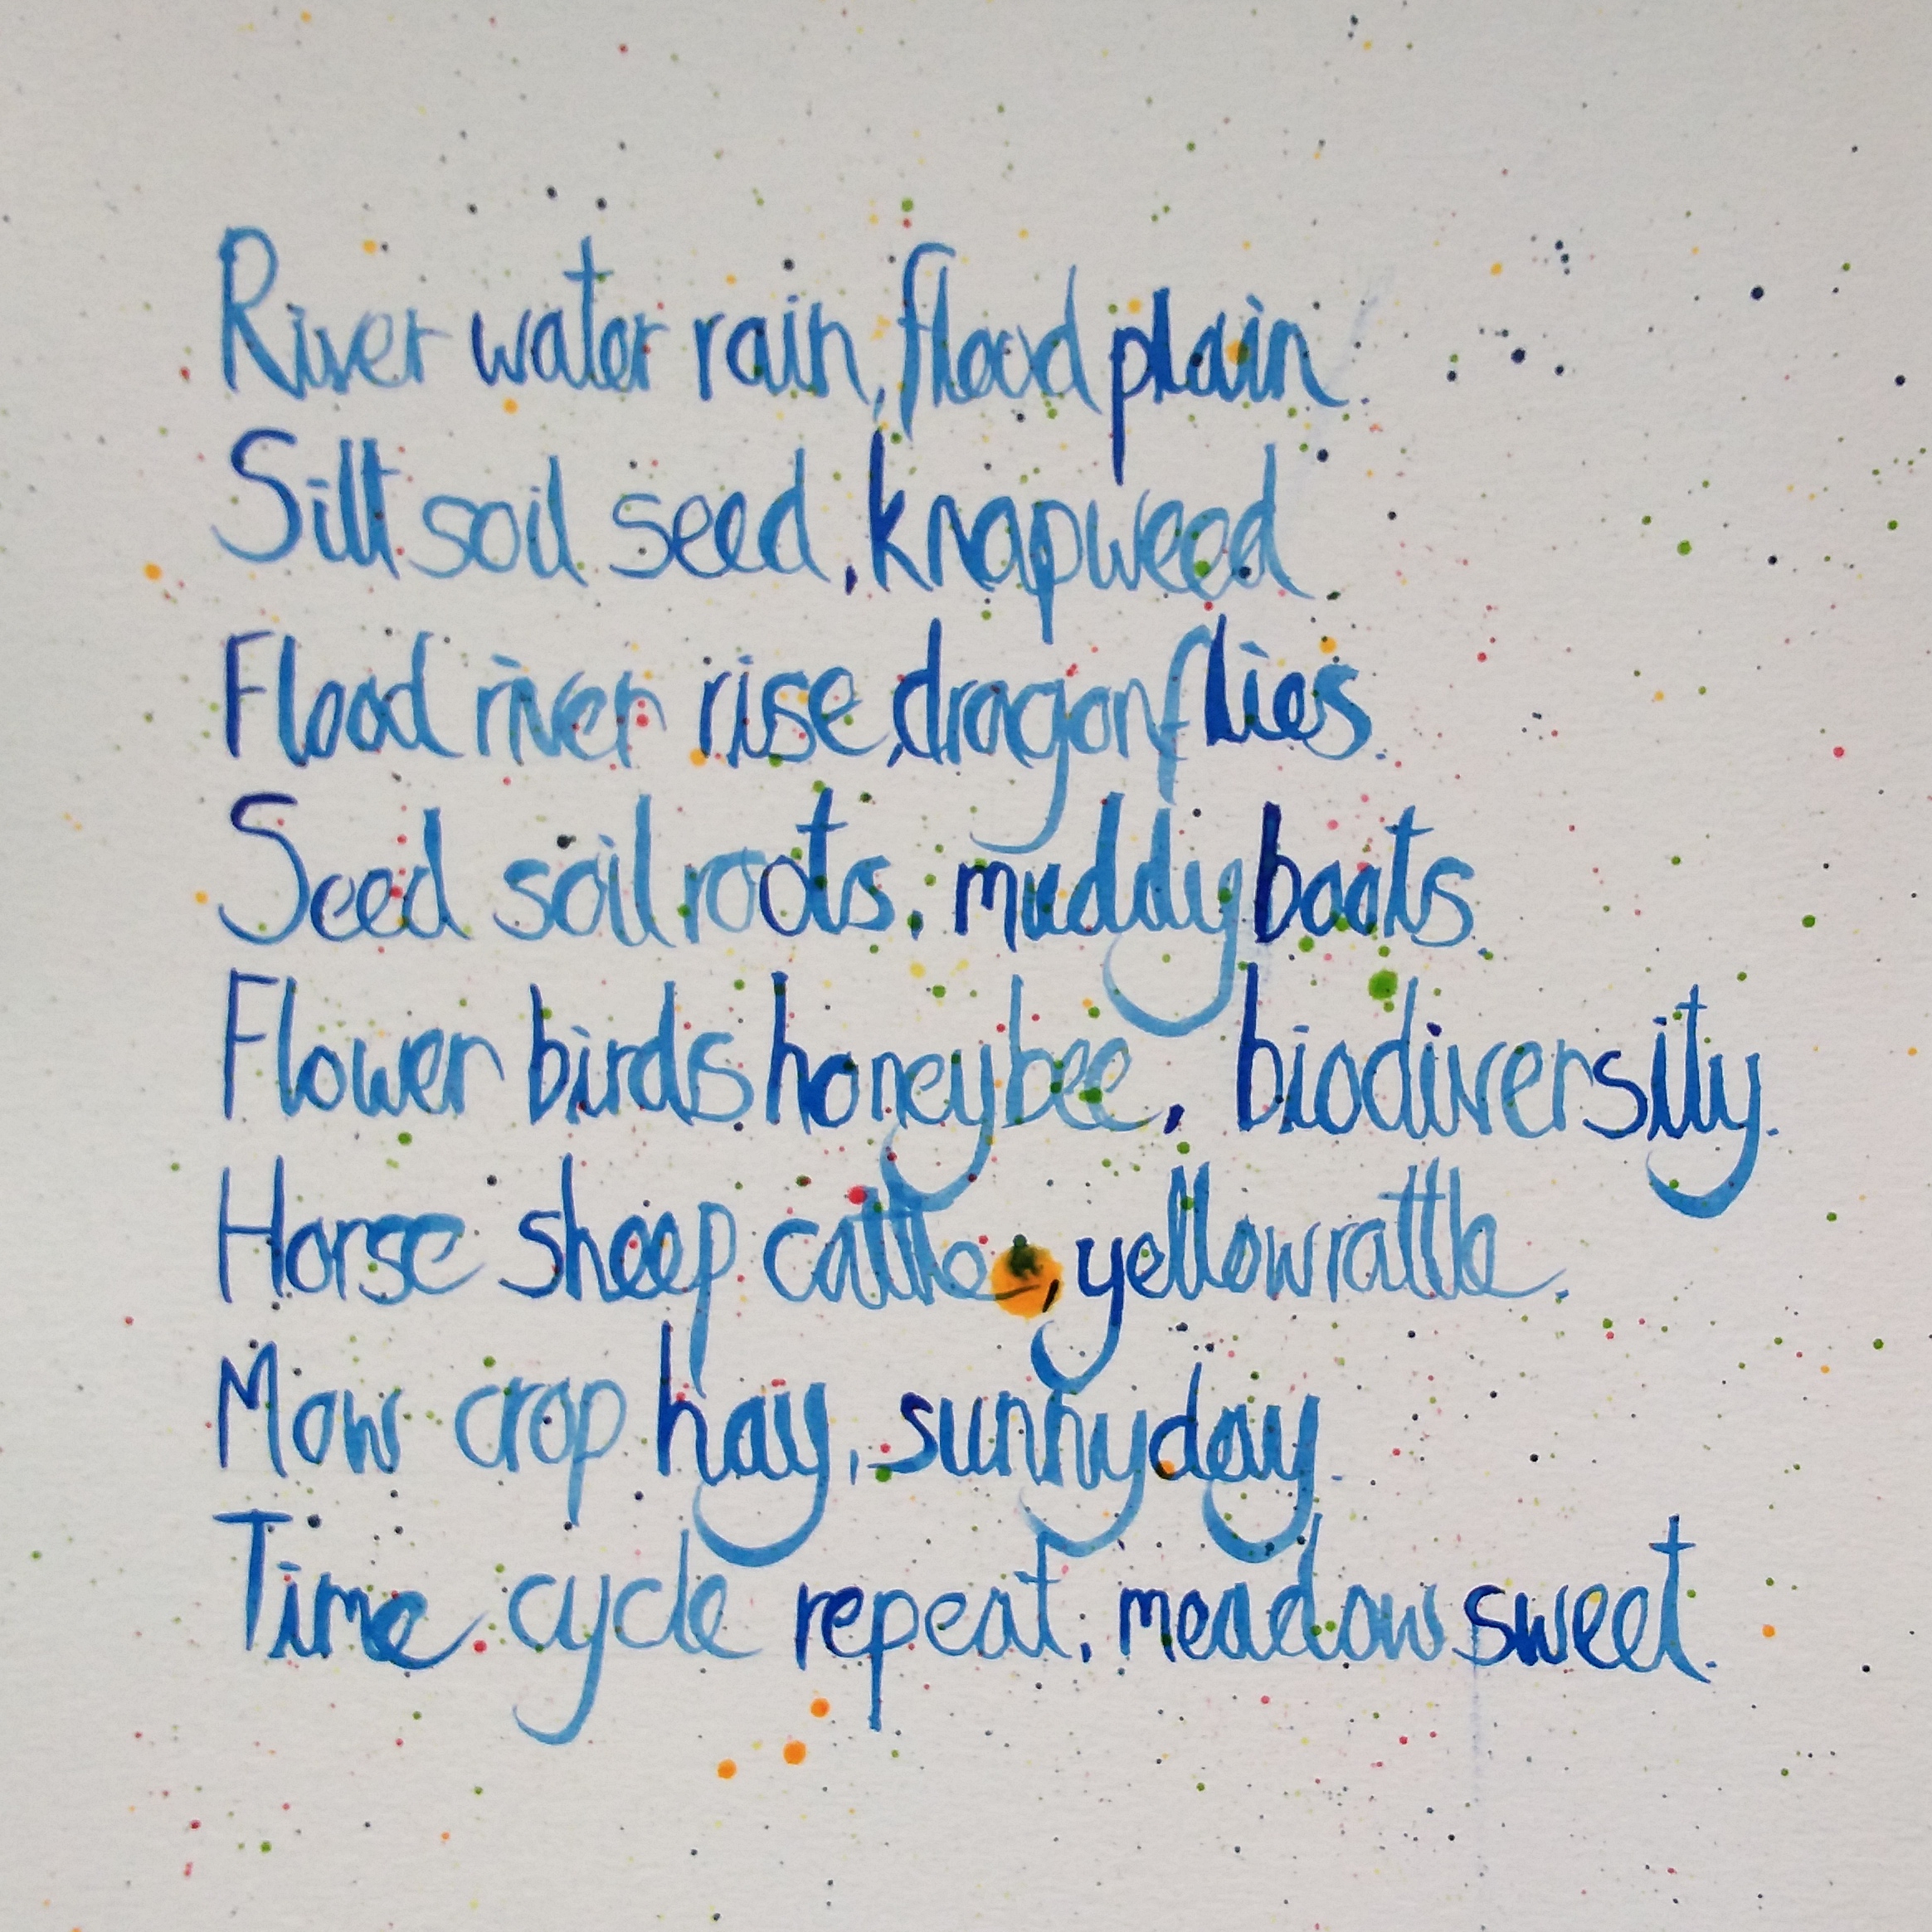 Image of a poem by Jeff Coles